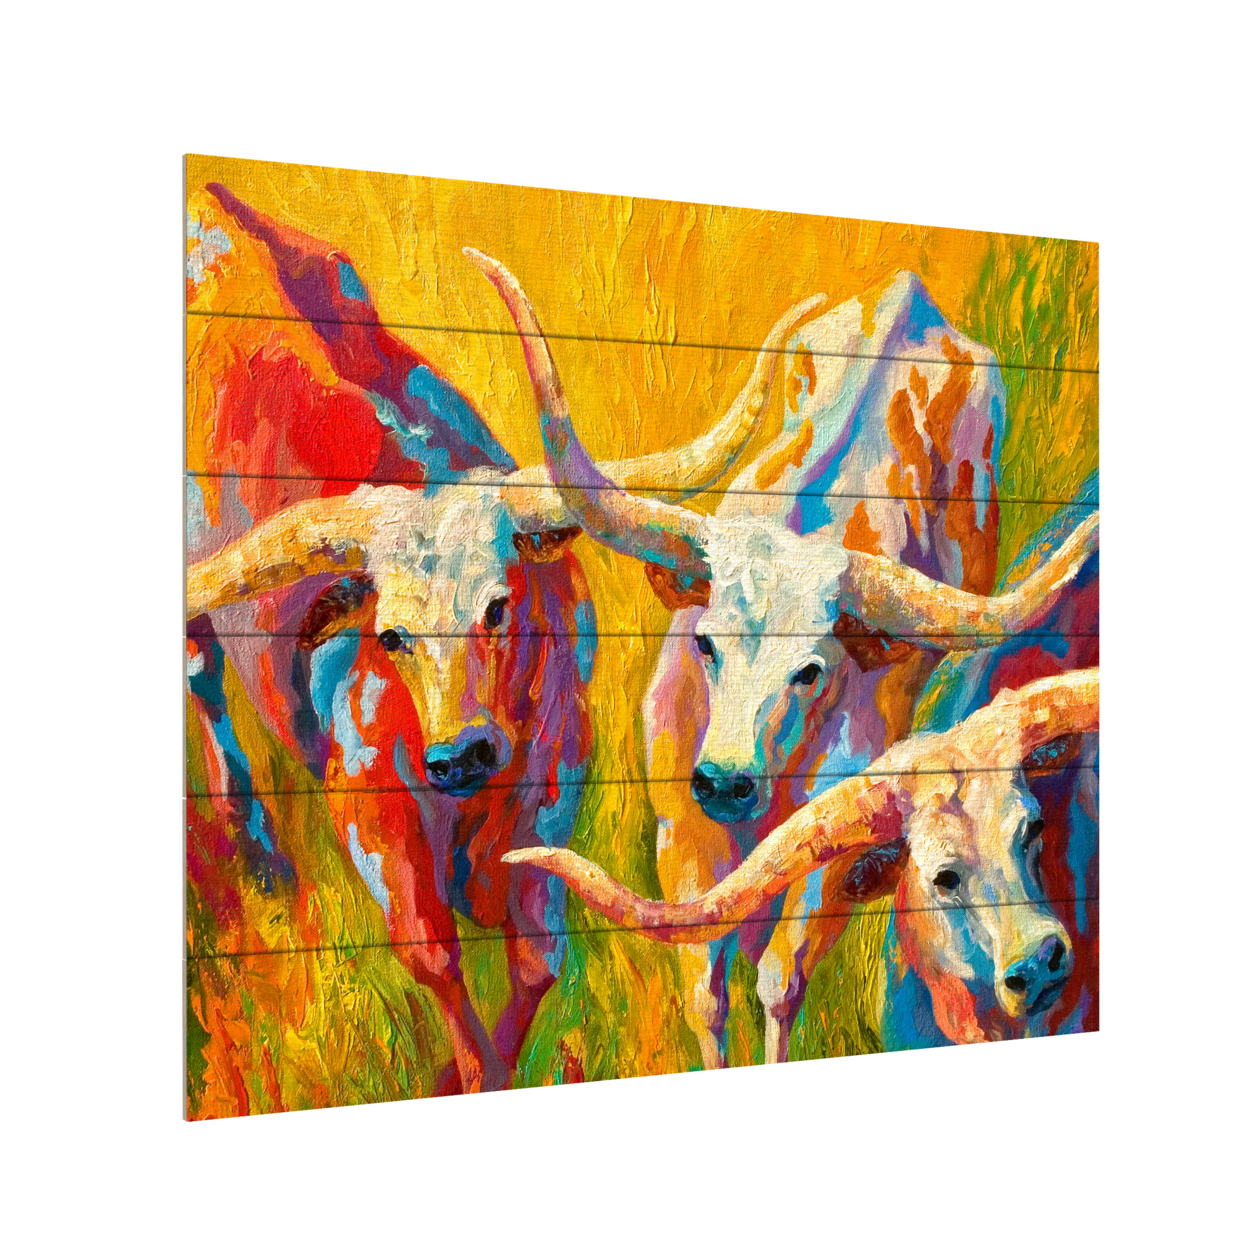 Wooden Slat Art 18 X 22 Inches Titled Dance Of The Longhorns Ready To Hang Home Decor Picture